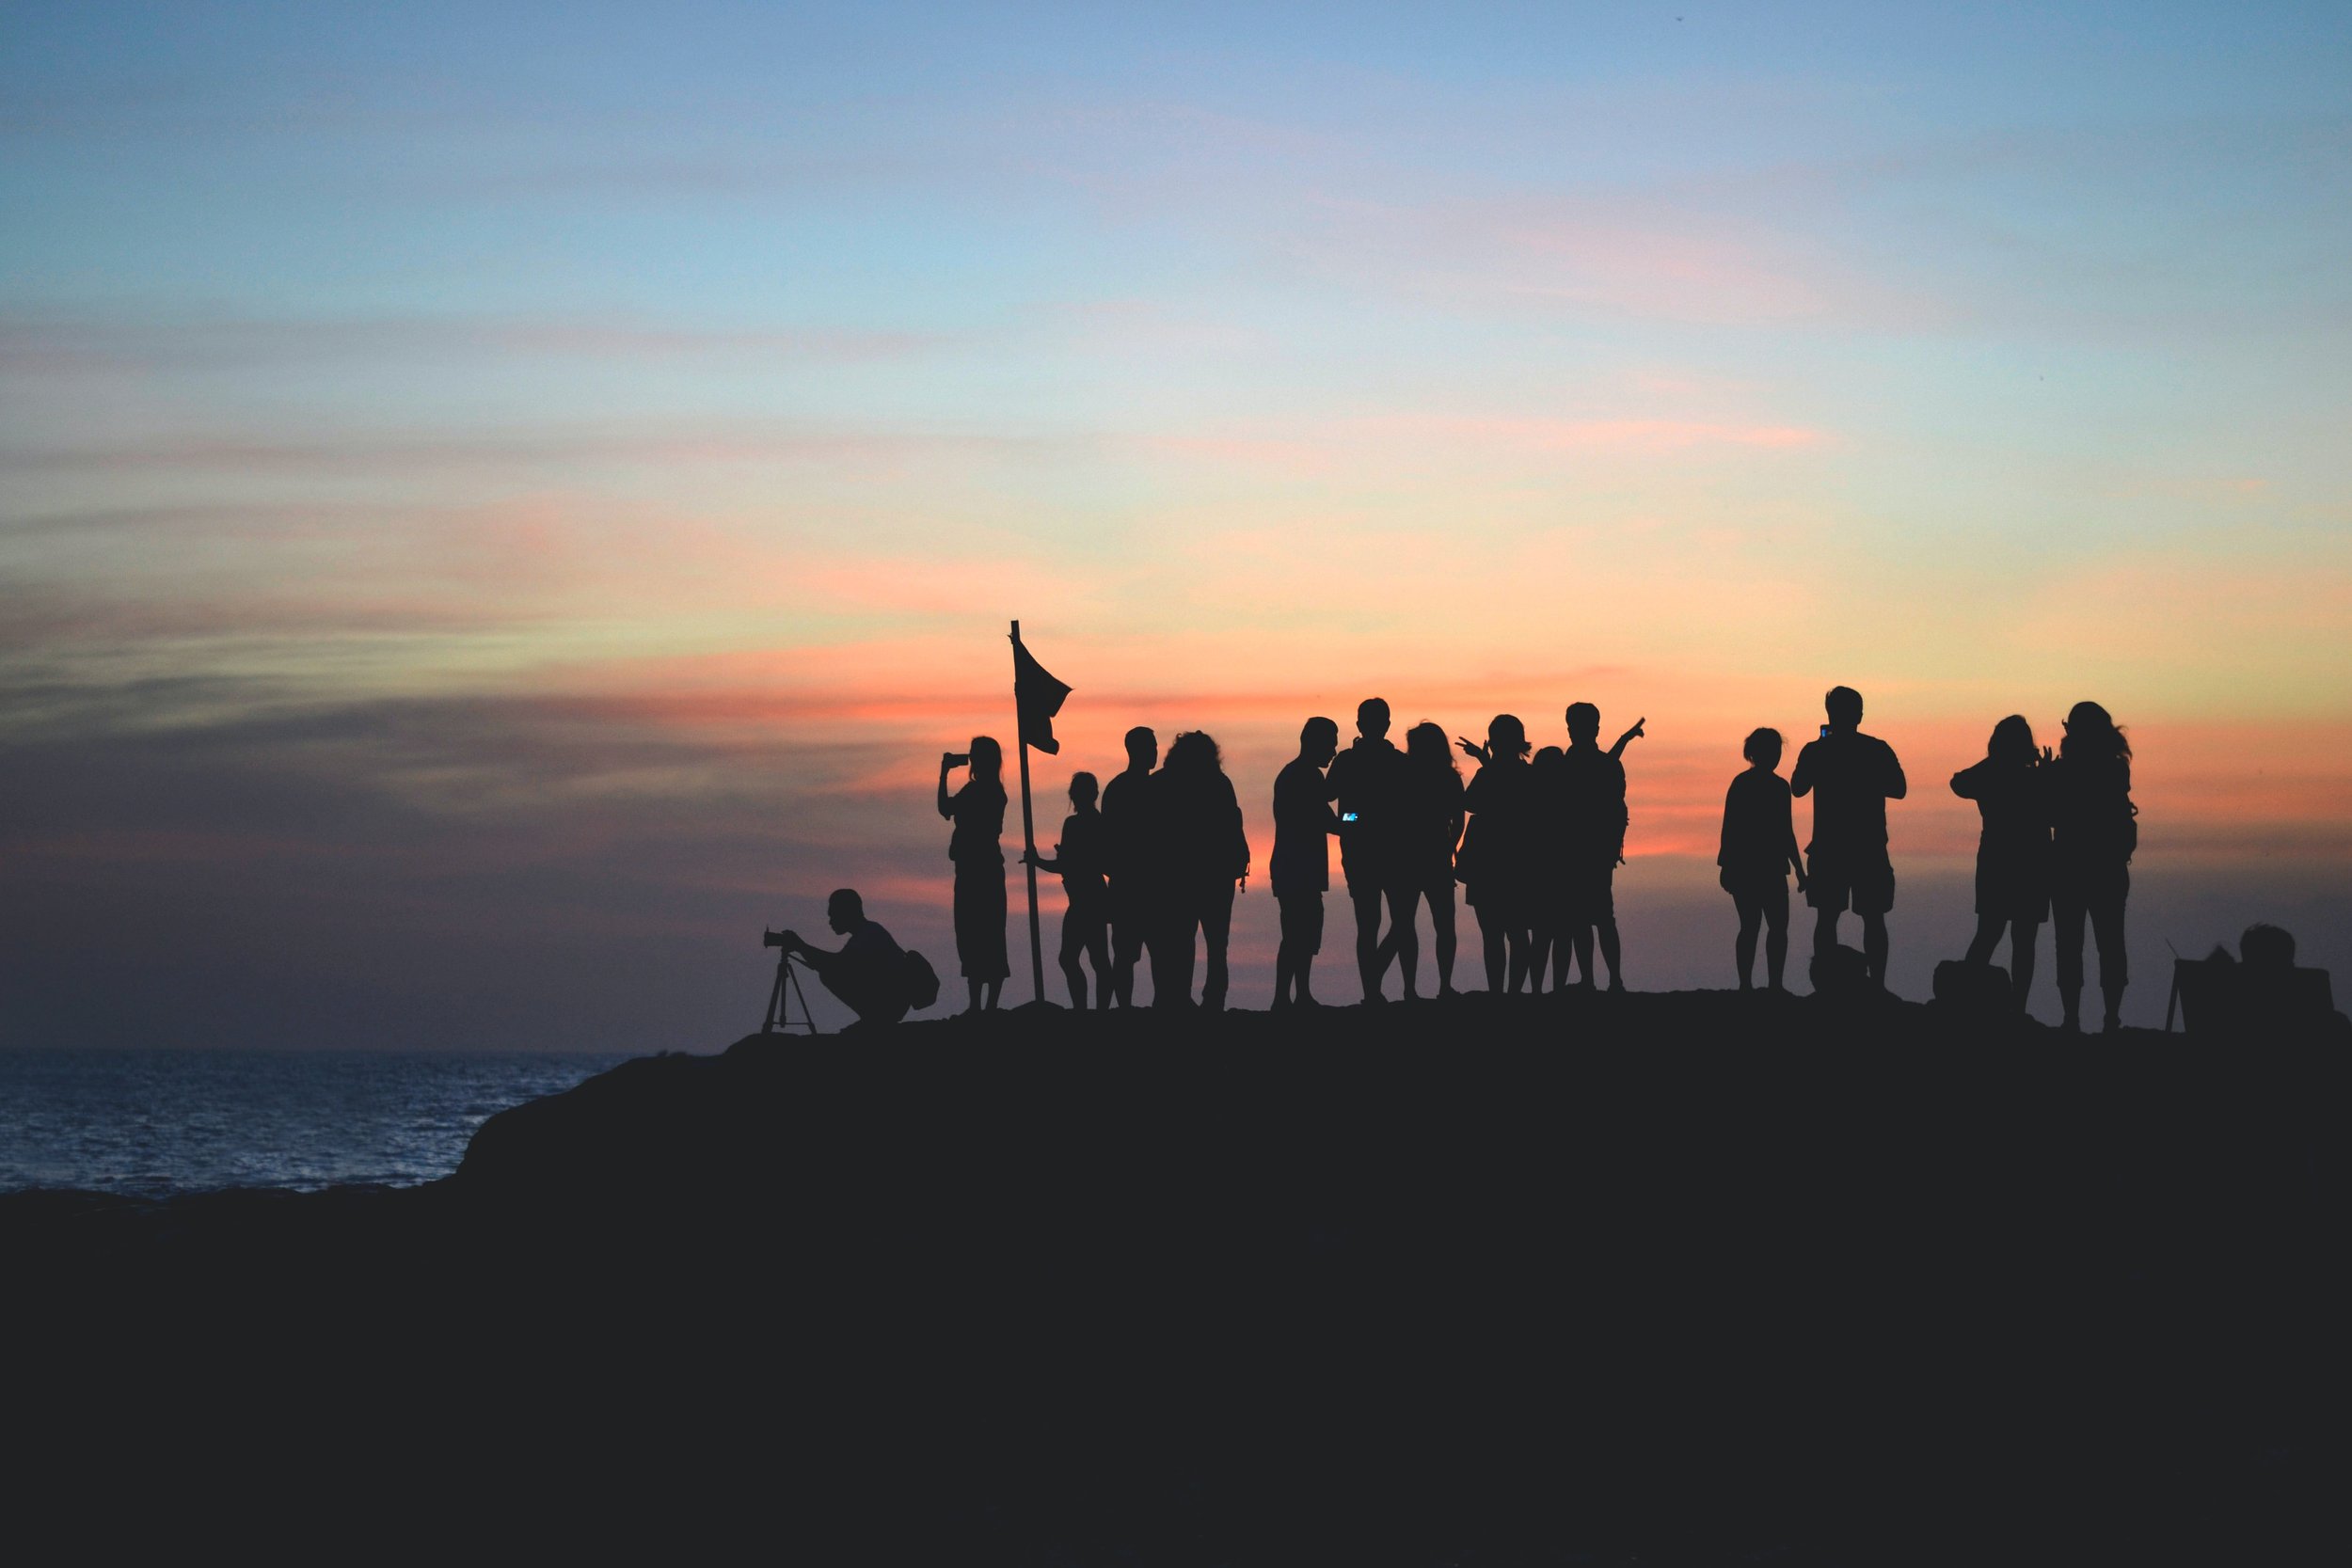 A group of people in silhouette standing on a hilltop overlooking a sunset.